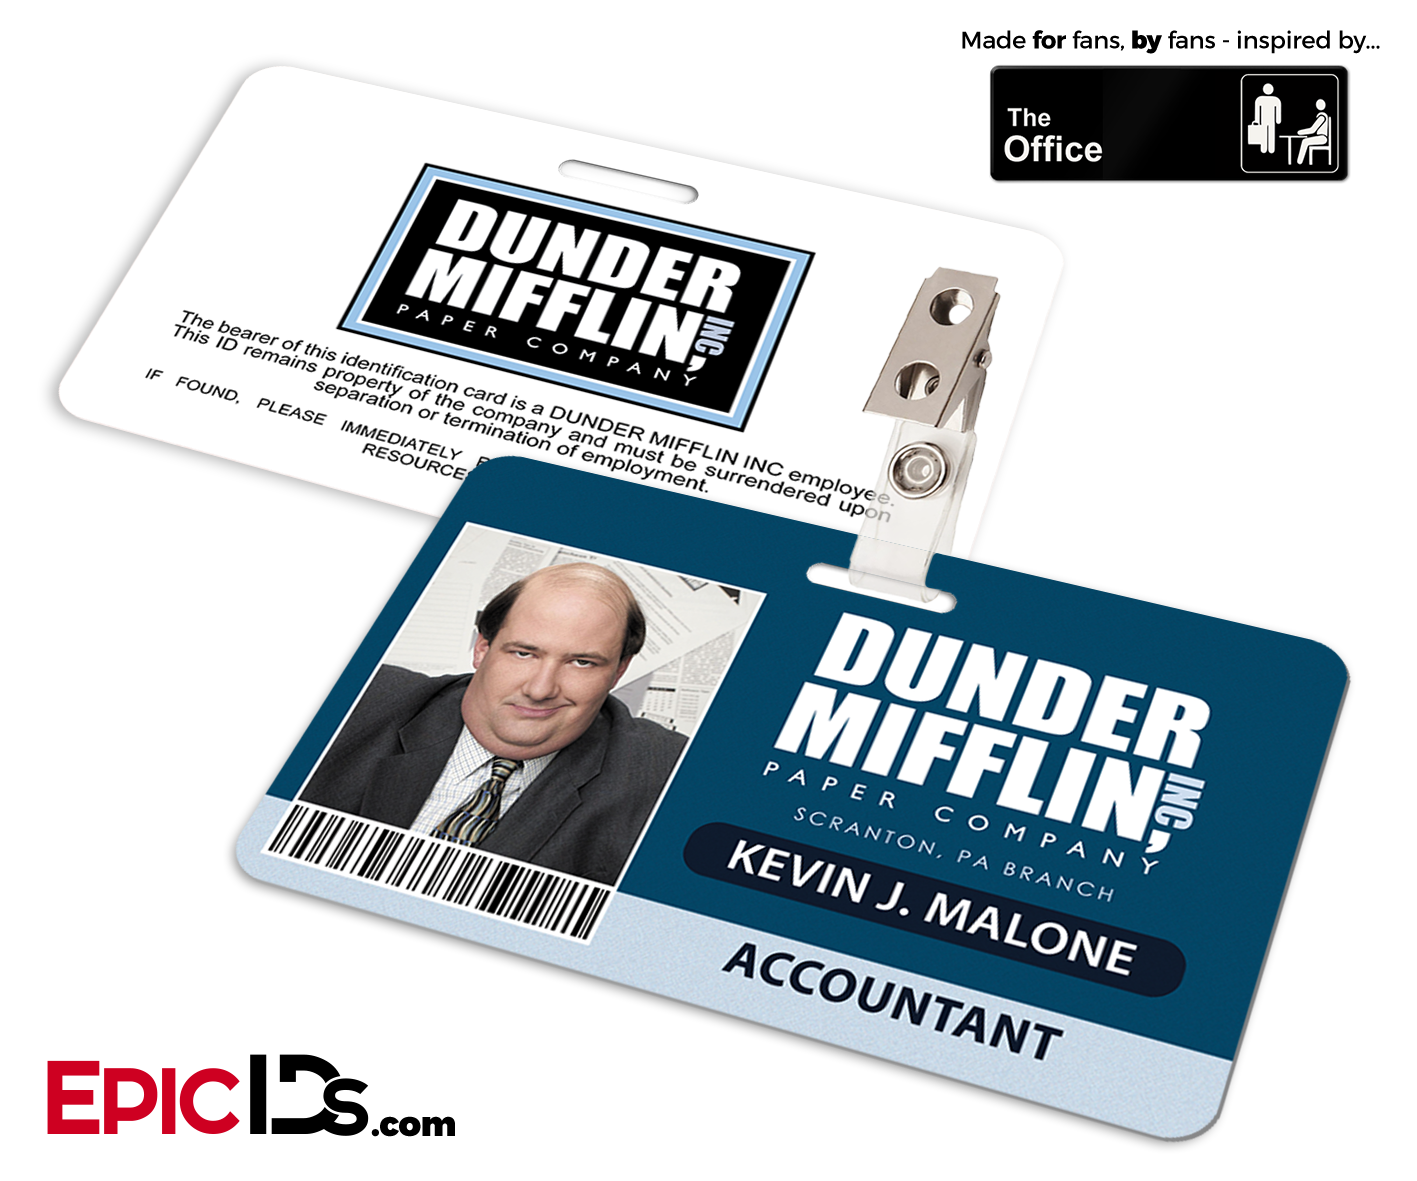 the-office-inspired-dunder-mifflin-employee-id-badge-kevin-malone